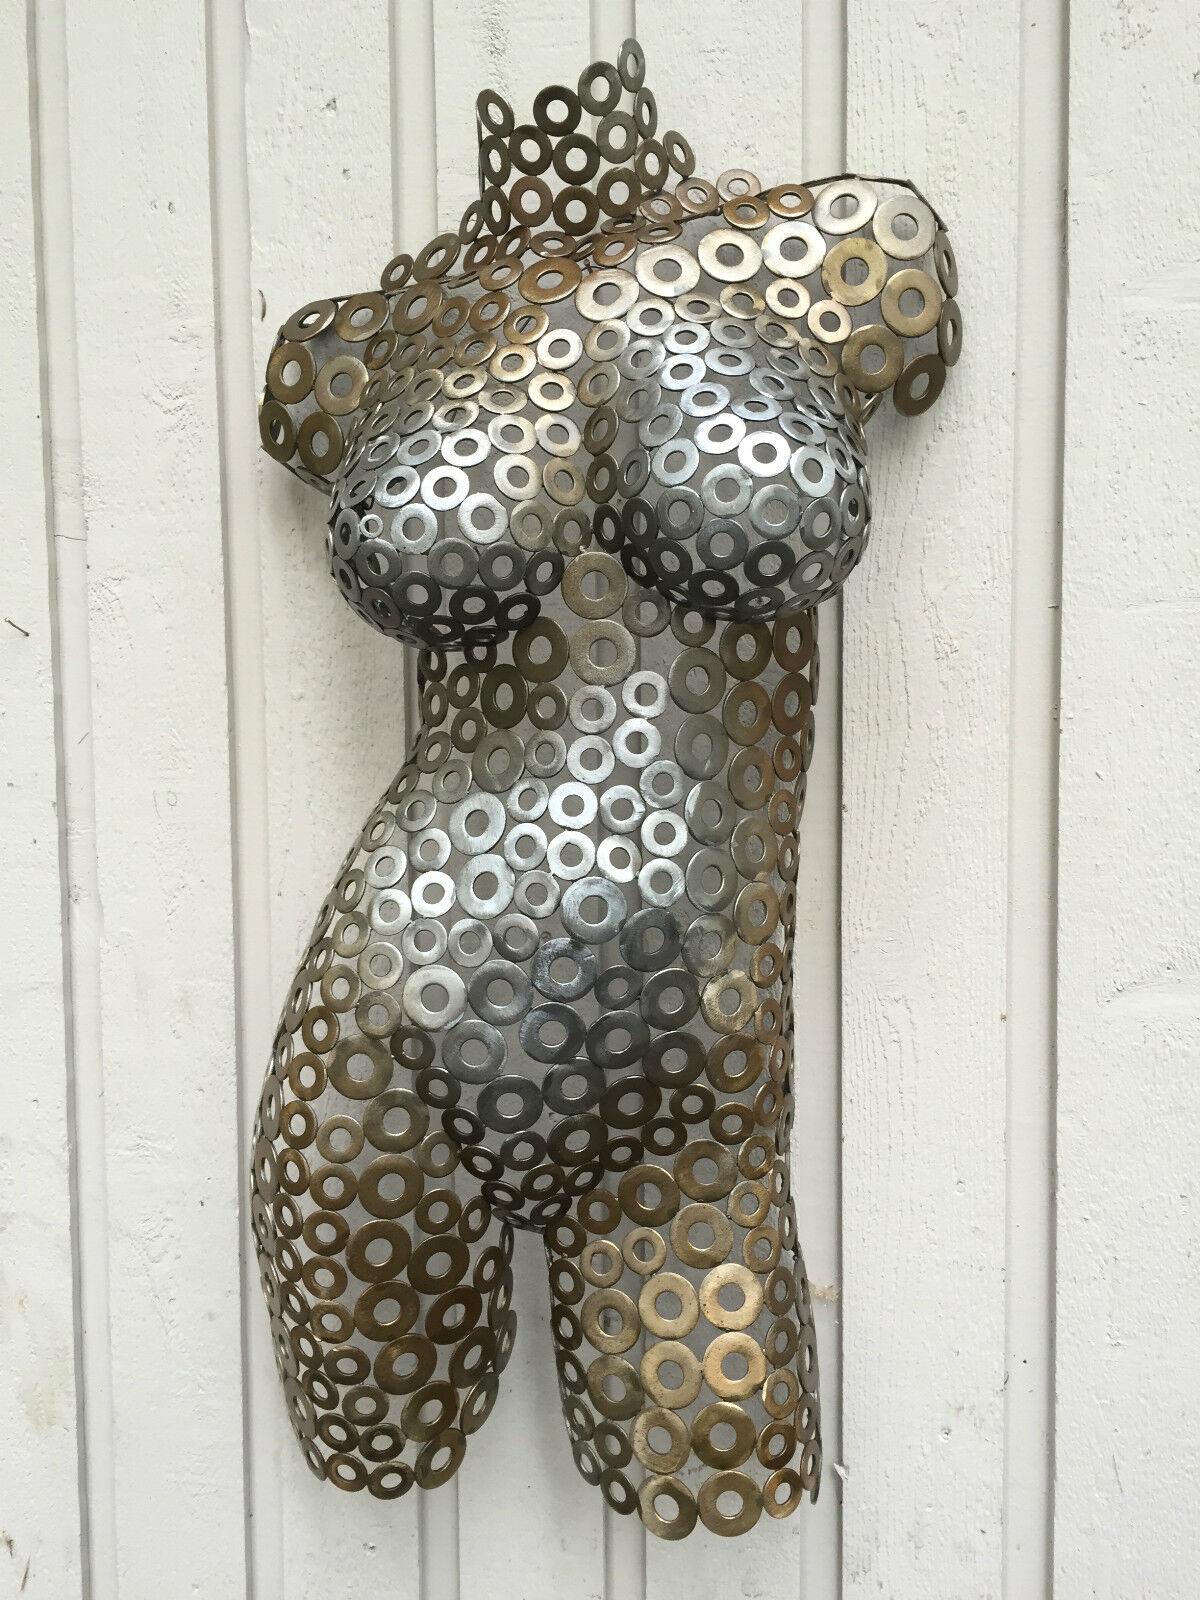 Abstract Metal Wall Art  home decor Sculpture Nude Torso by Holly Lentz